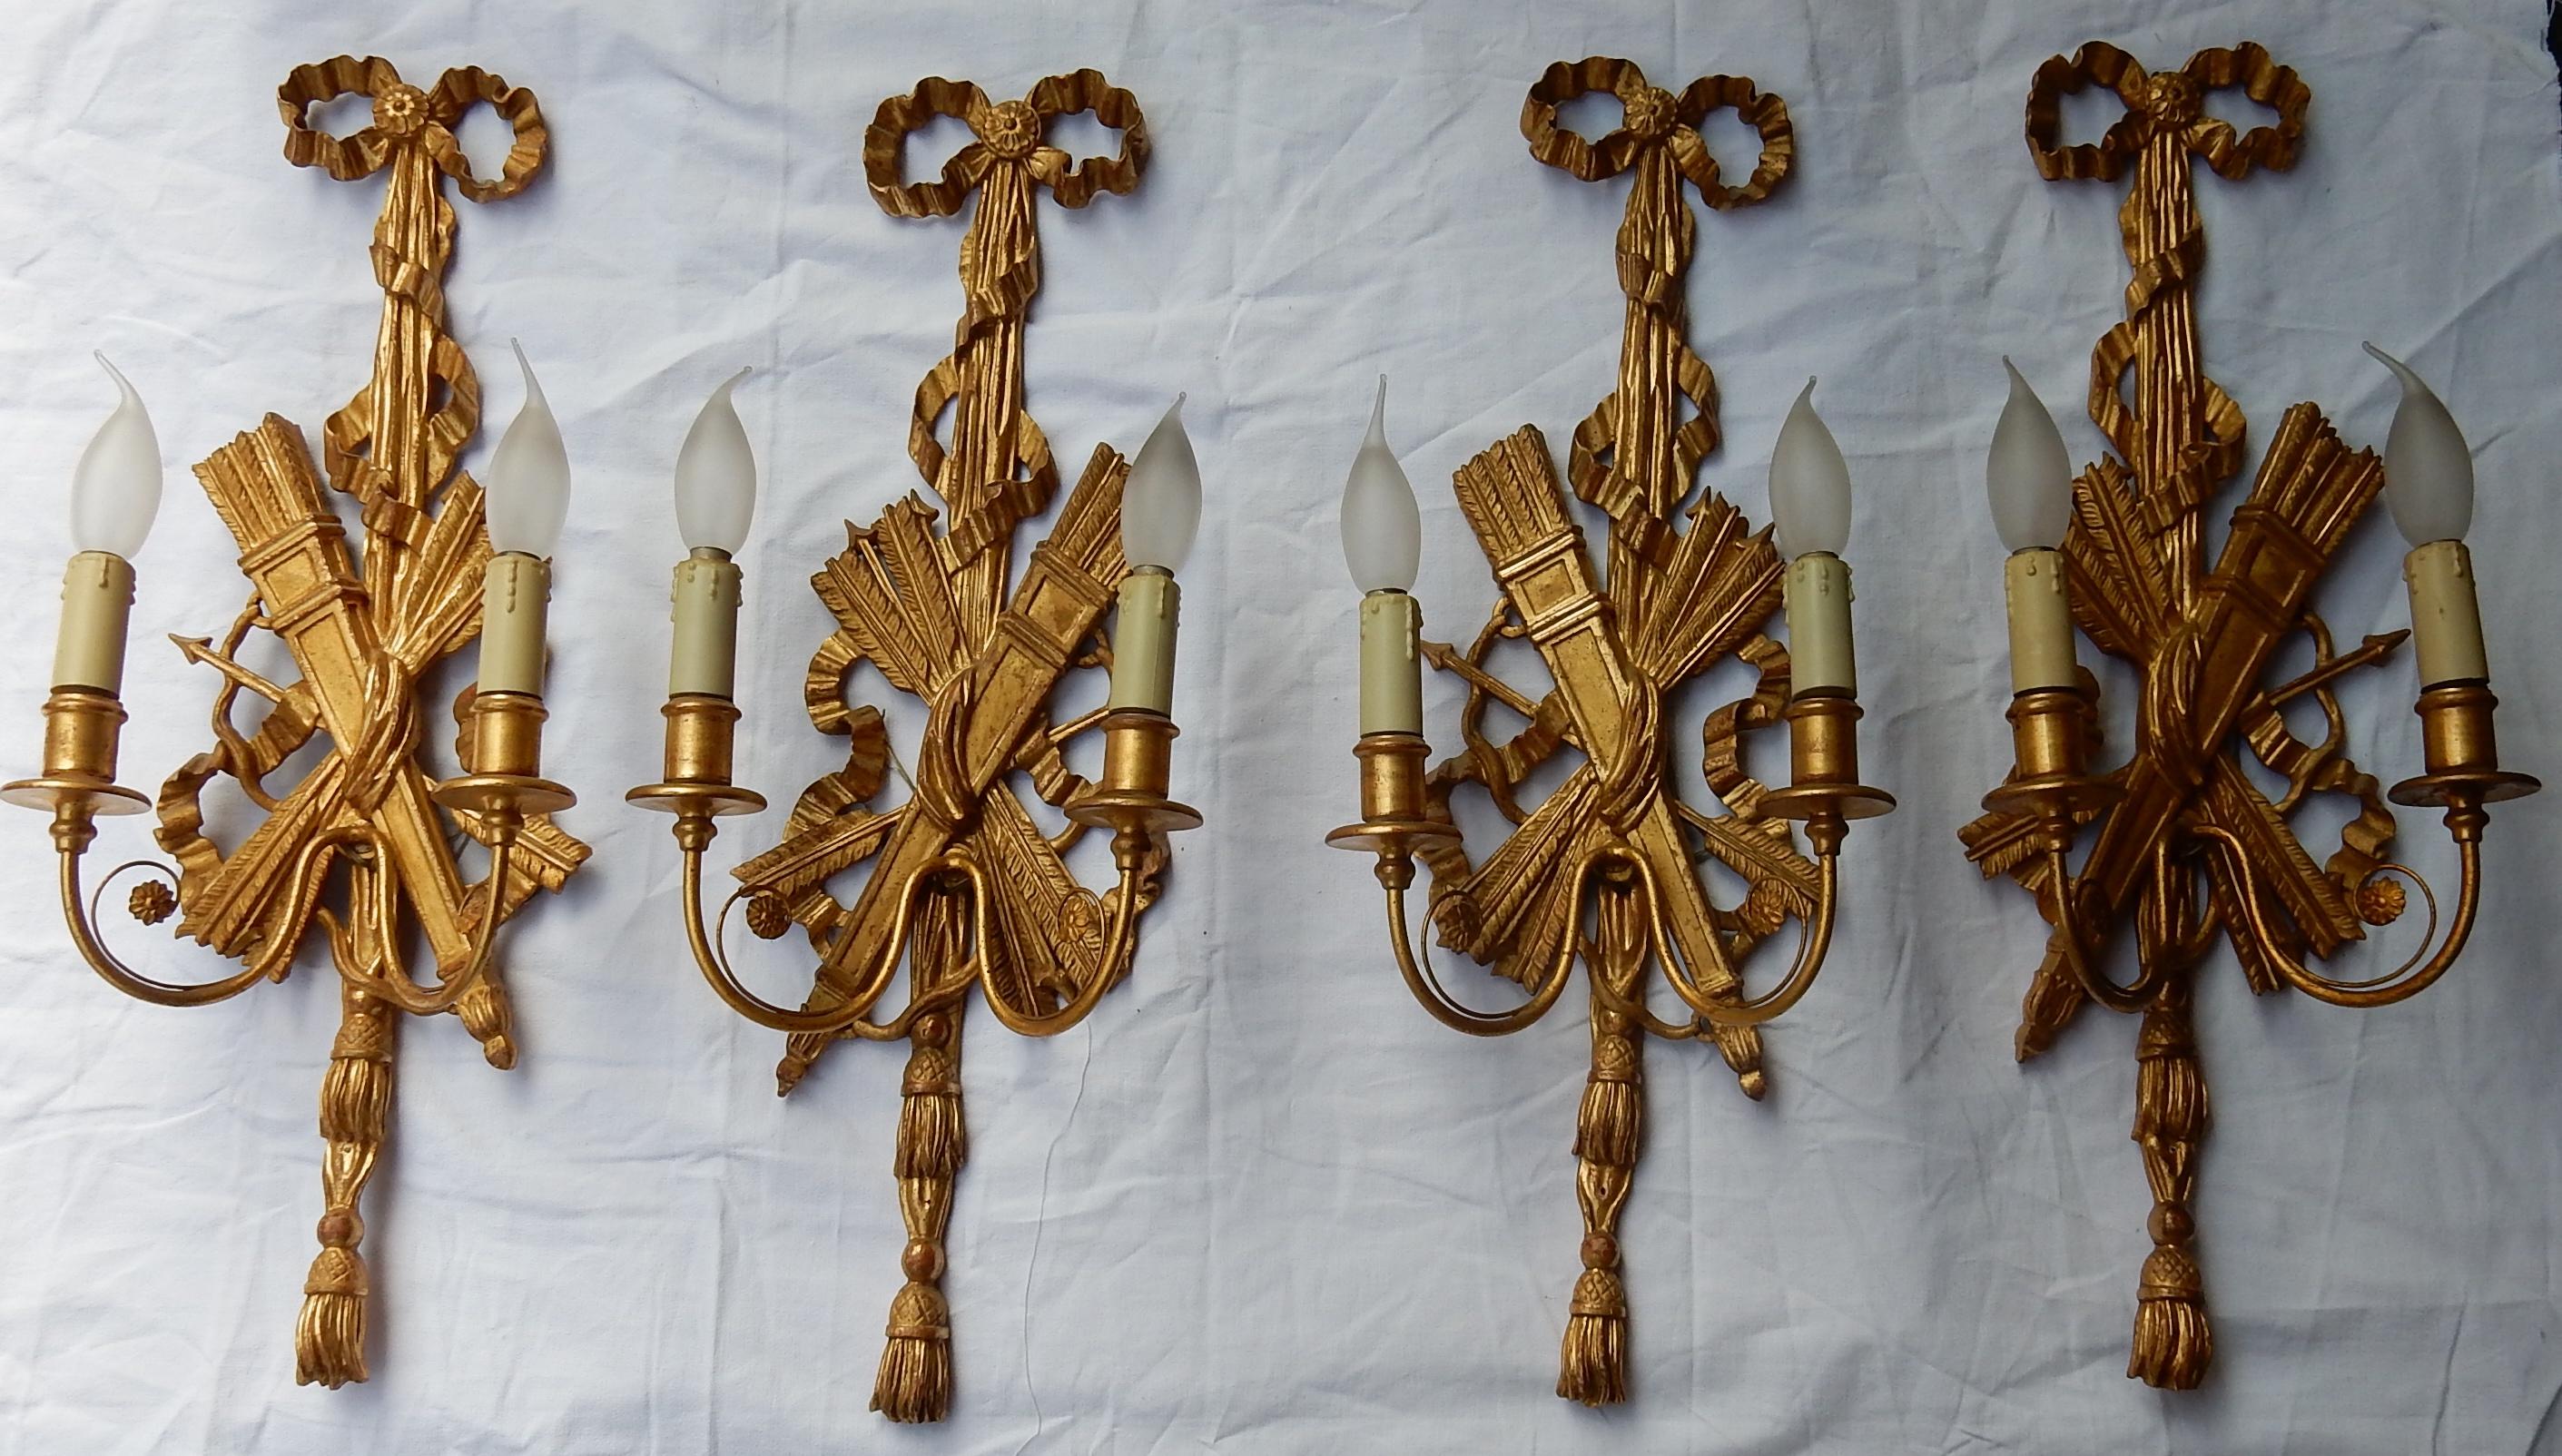 2 pair of golden wooden wall lamps, circa 1950-1970, in the style of LXVI, attributes with arrows and quivers. Good condition.